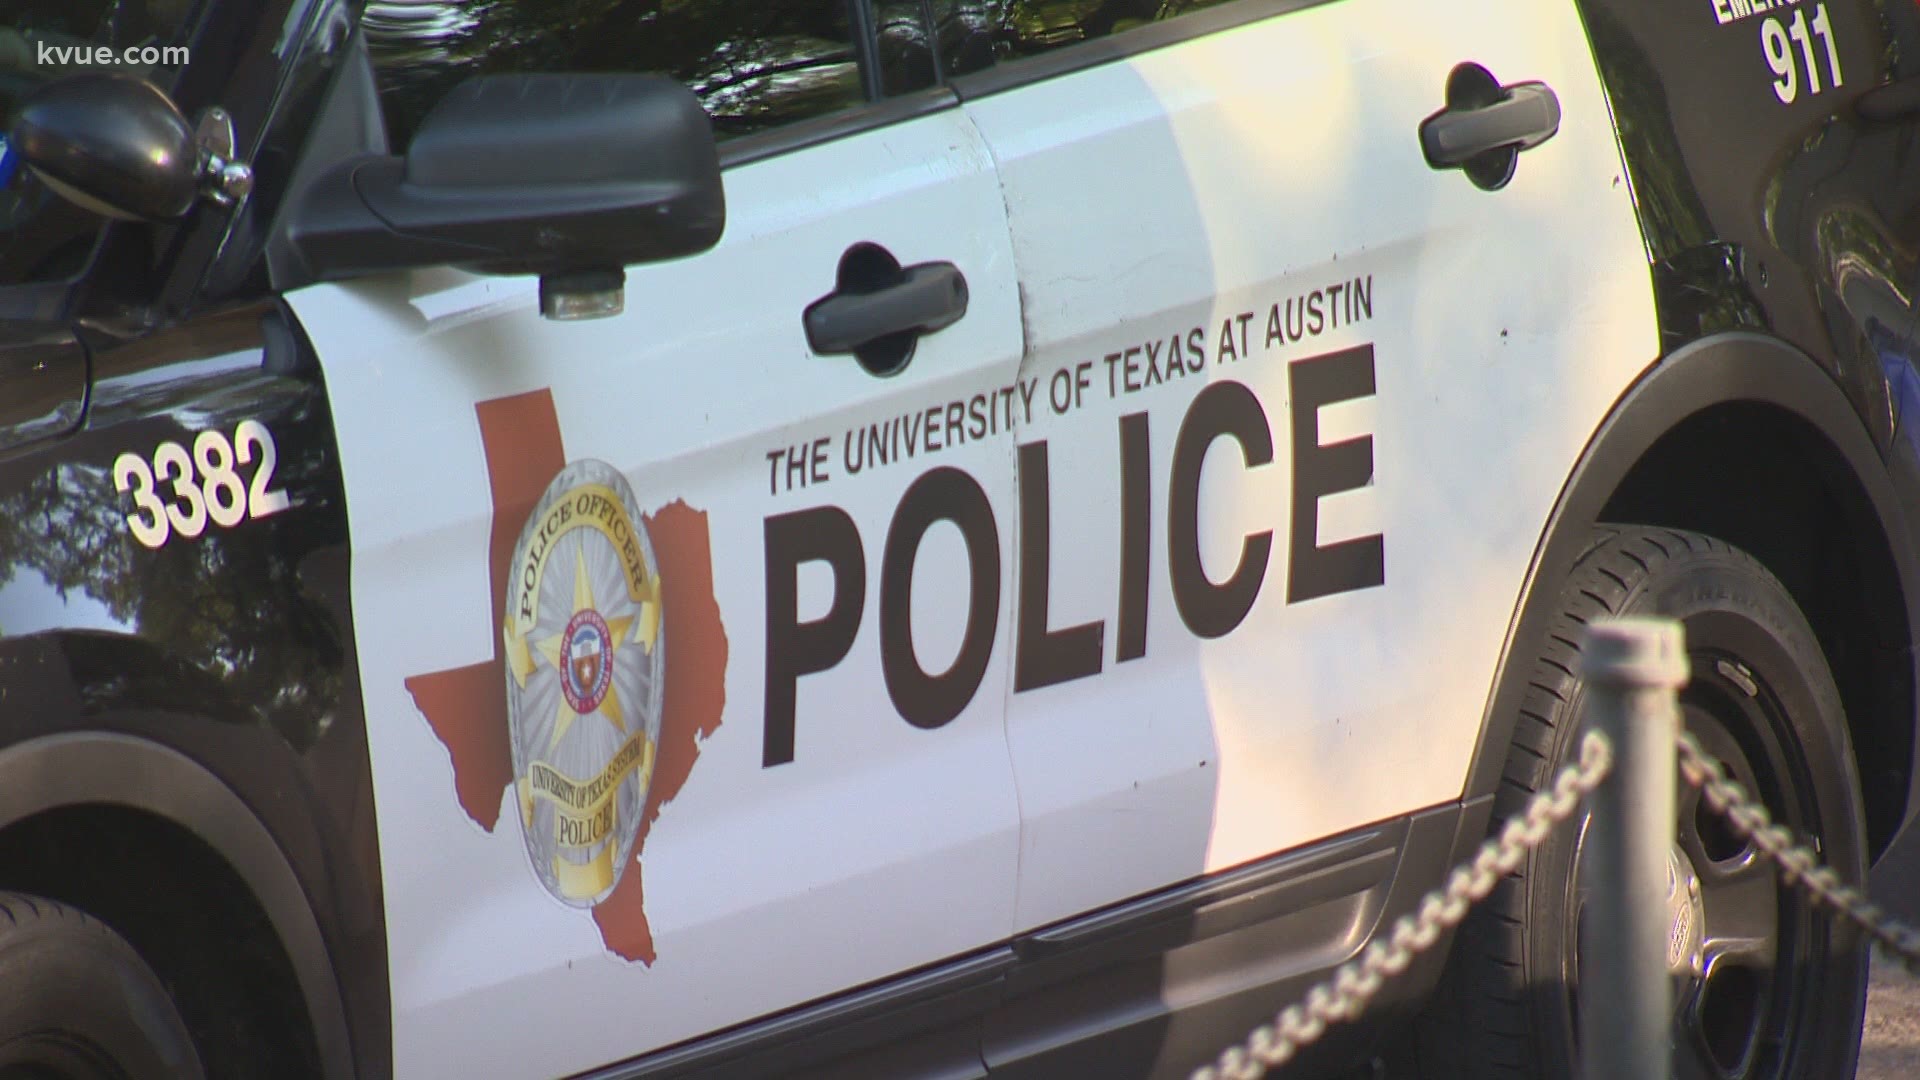 Police say men are driving around Austin targeting women who are walking alone at night. Three of the victims have been University of Texas students.